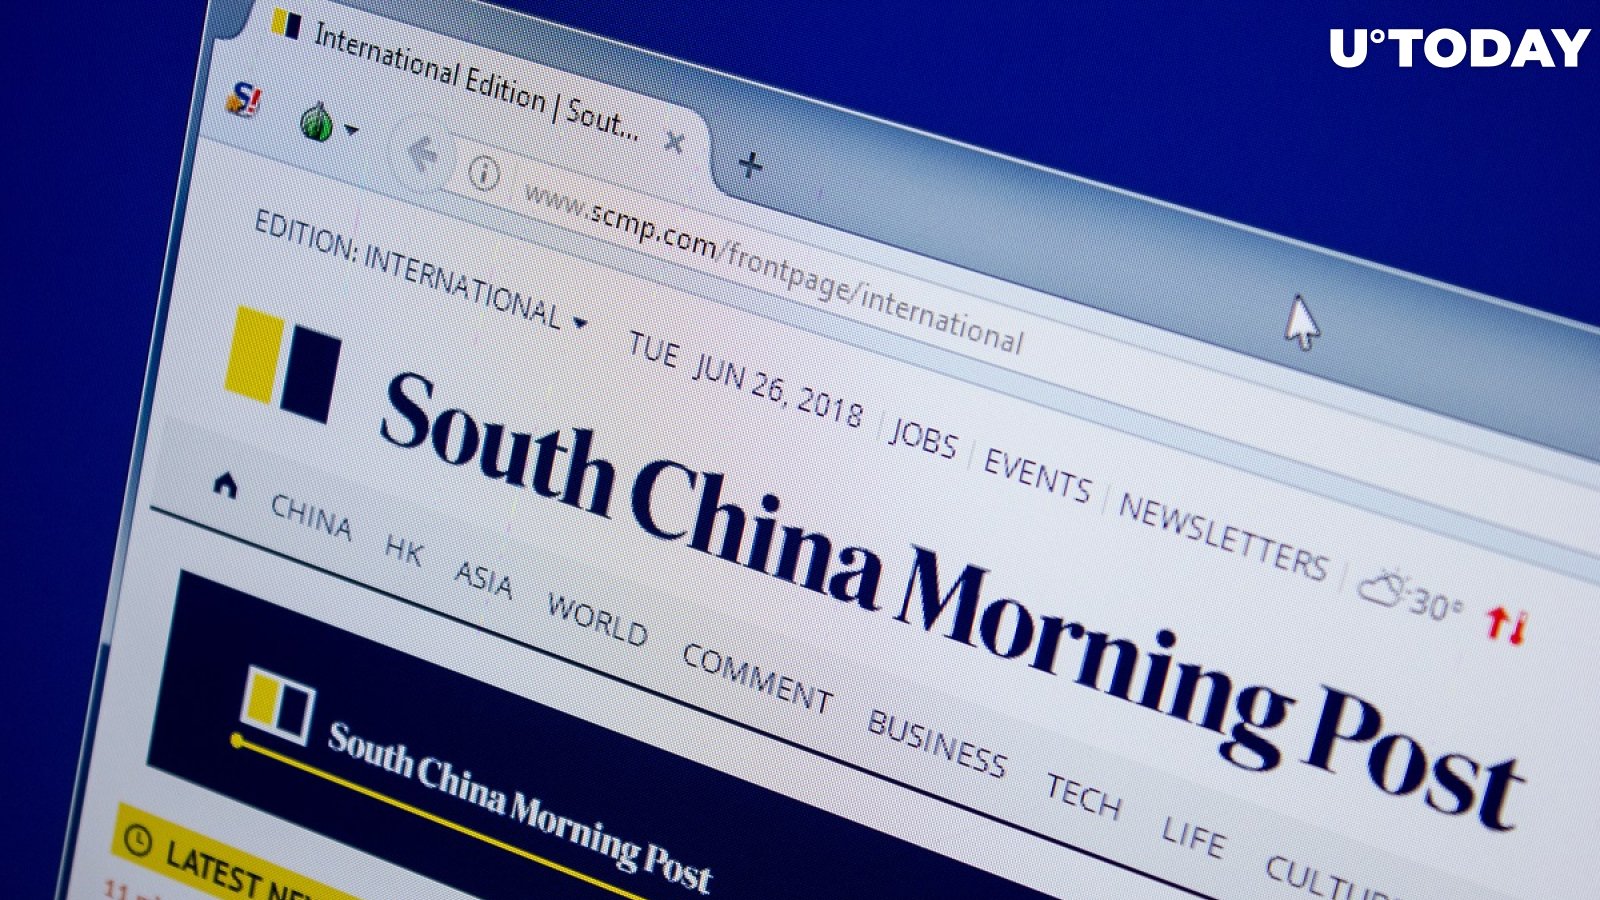 Alibaba-Owned South China Morning Post Makes Major Foray Into NFT Industry